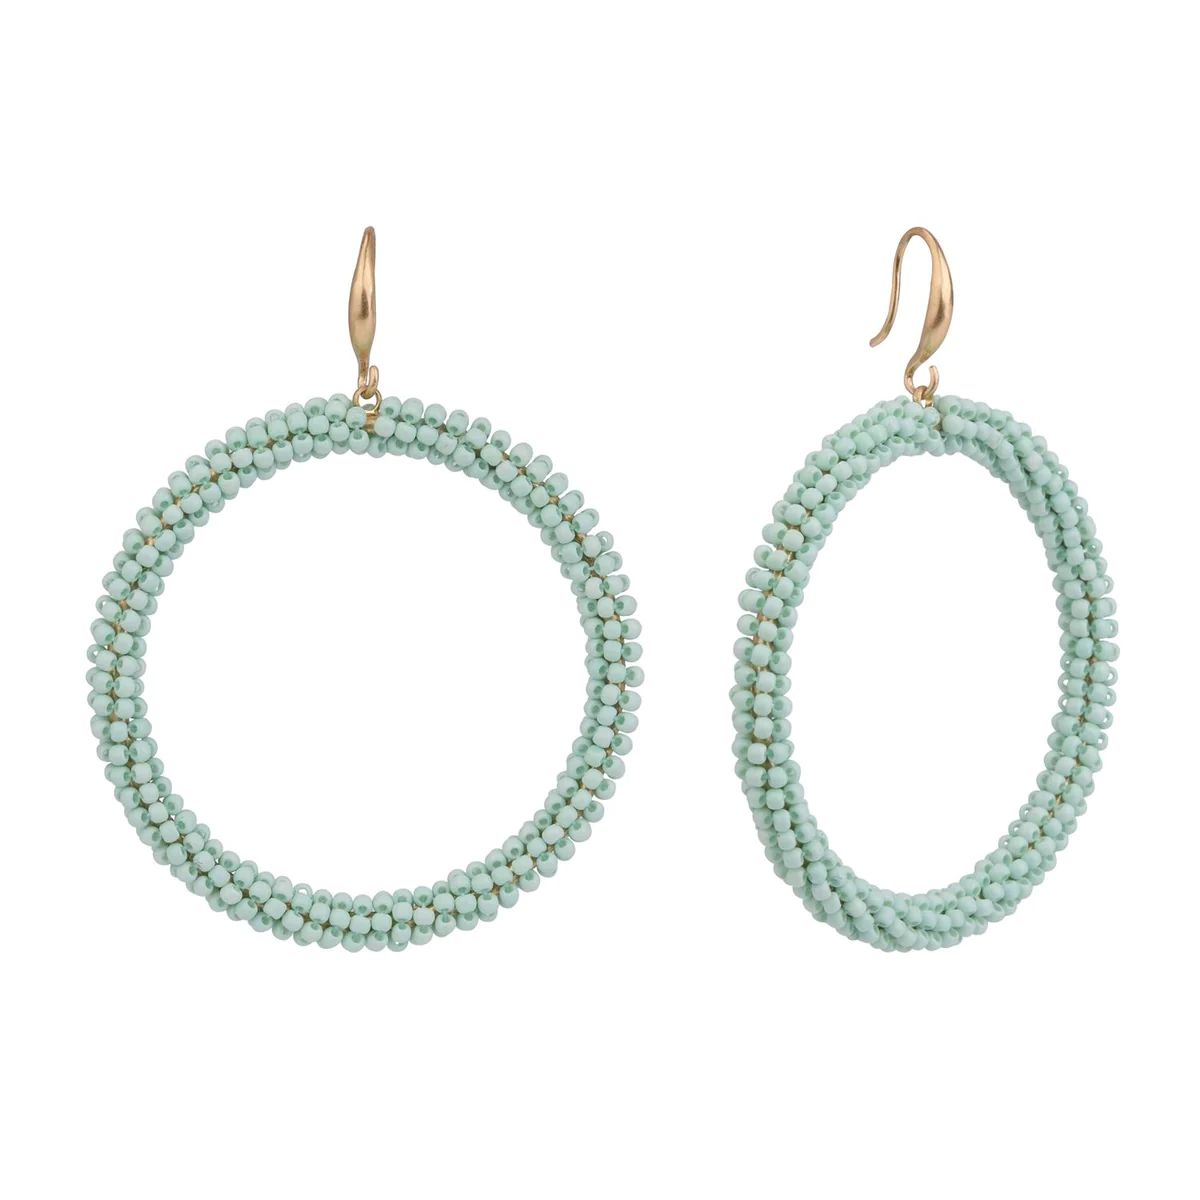 Seed Bead Wrapped Ring Earrings | Lord & Taylor